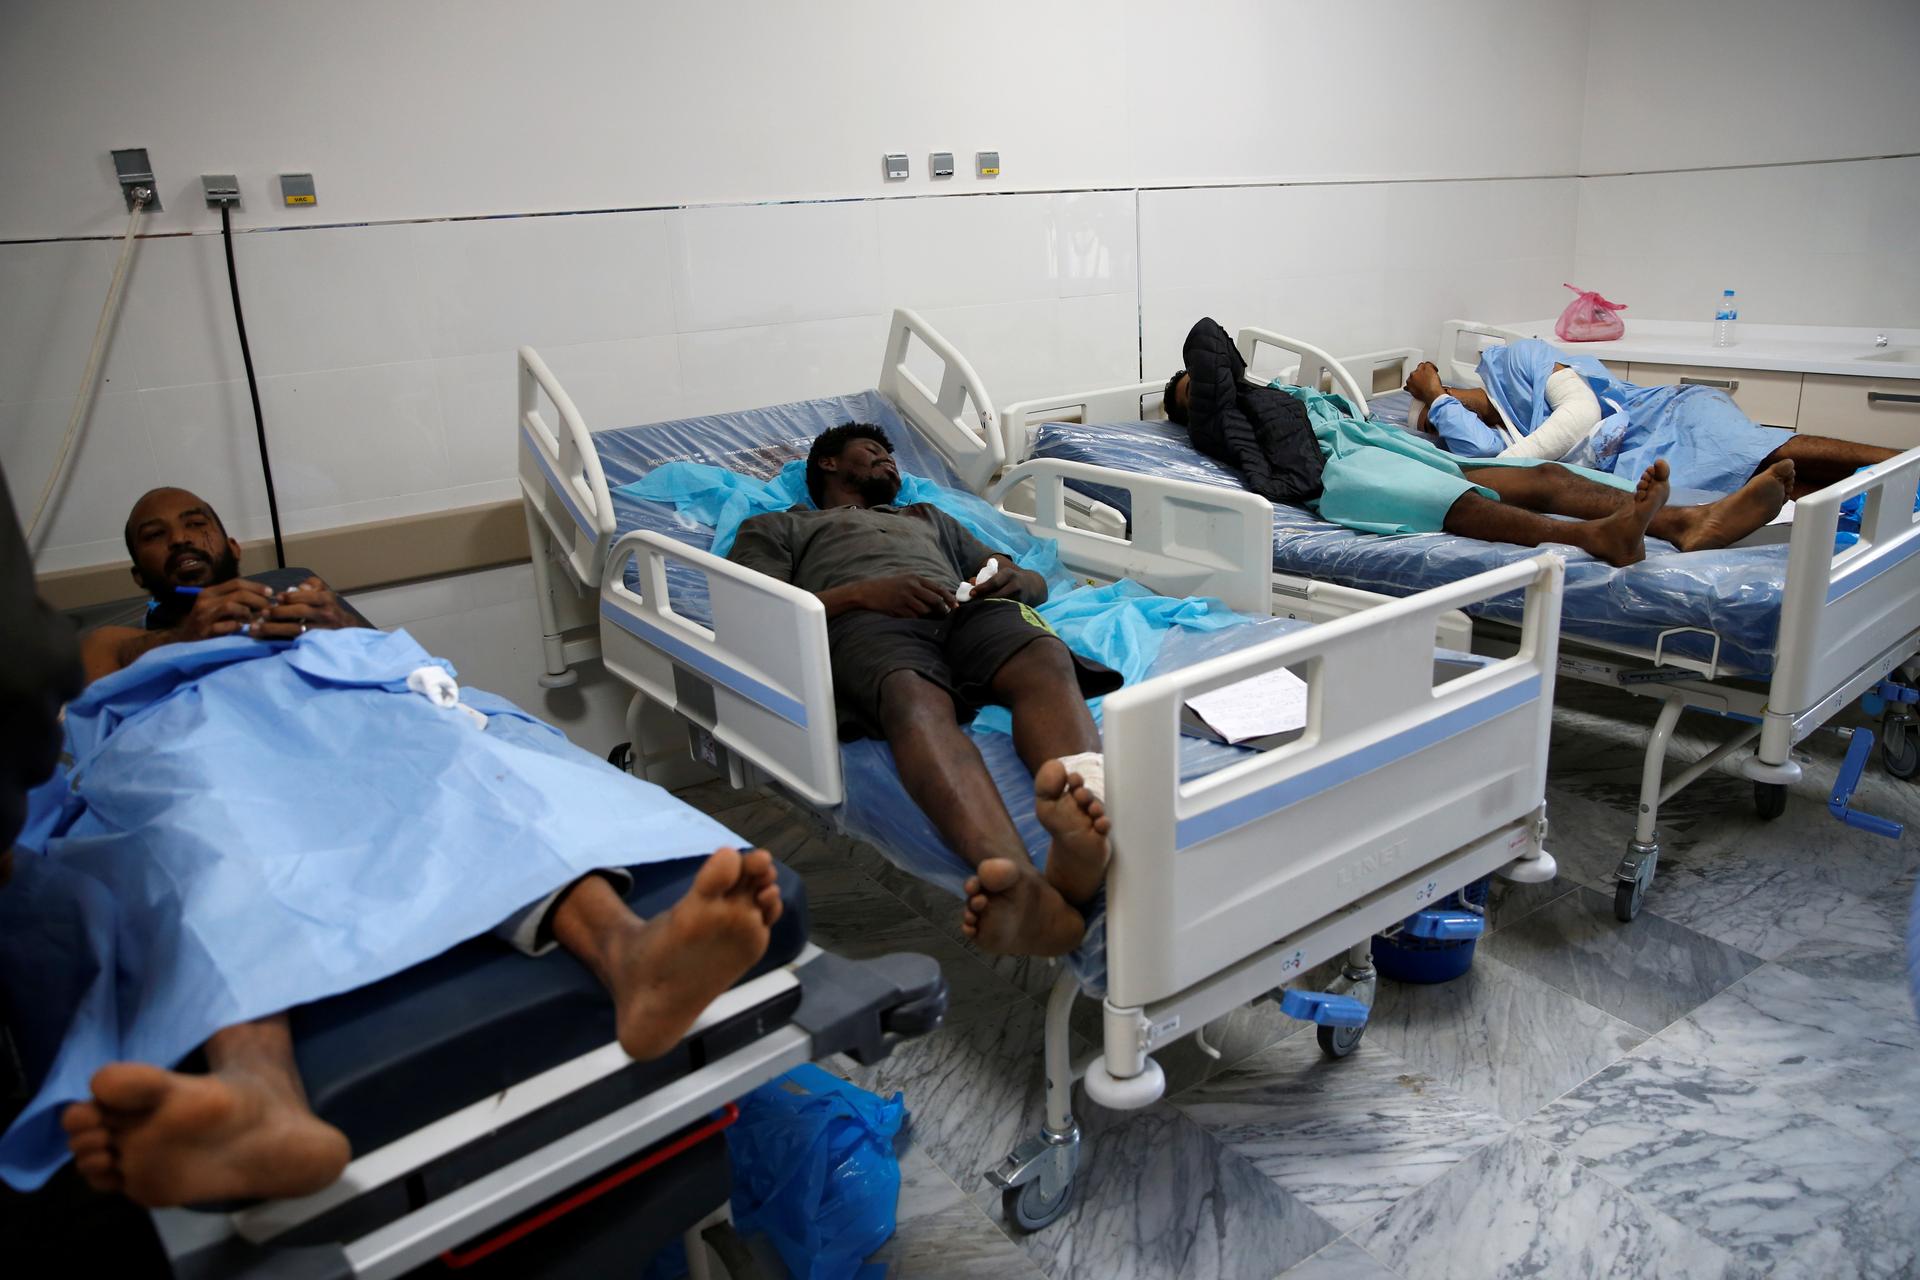 Wounded migrants lie on hospital beds after an air strike hit a detention center for mainly African migrants in Tajoura, in Tripoli Central Hospital, Libya, July 3, 2019.